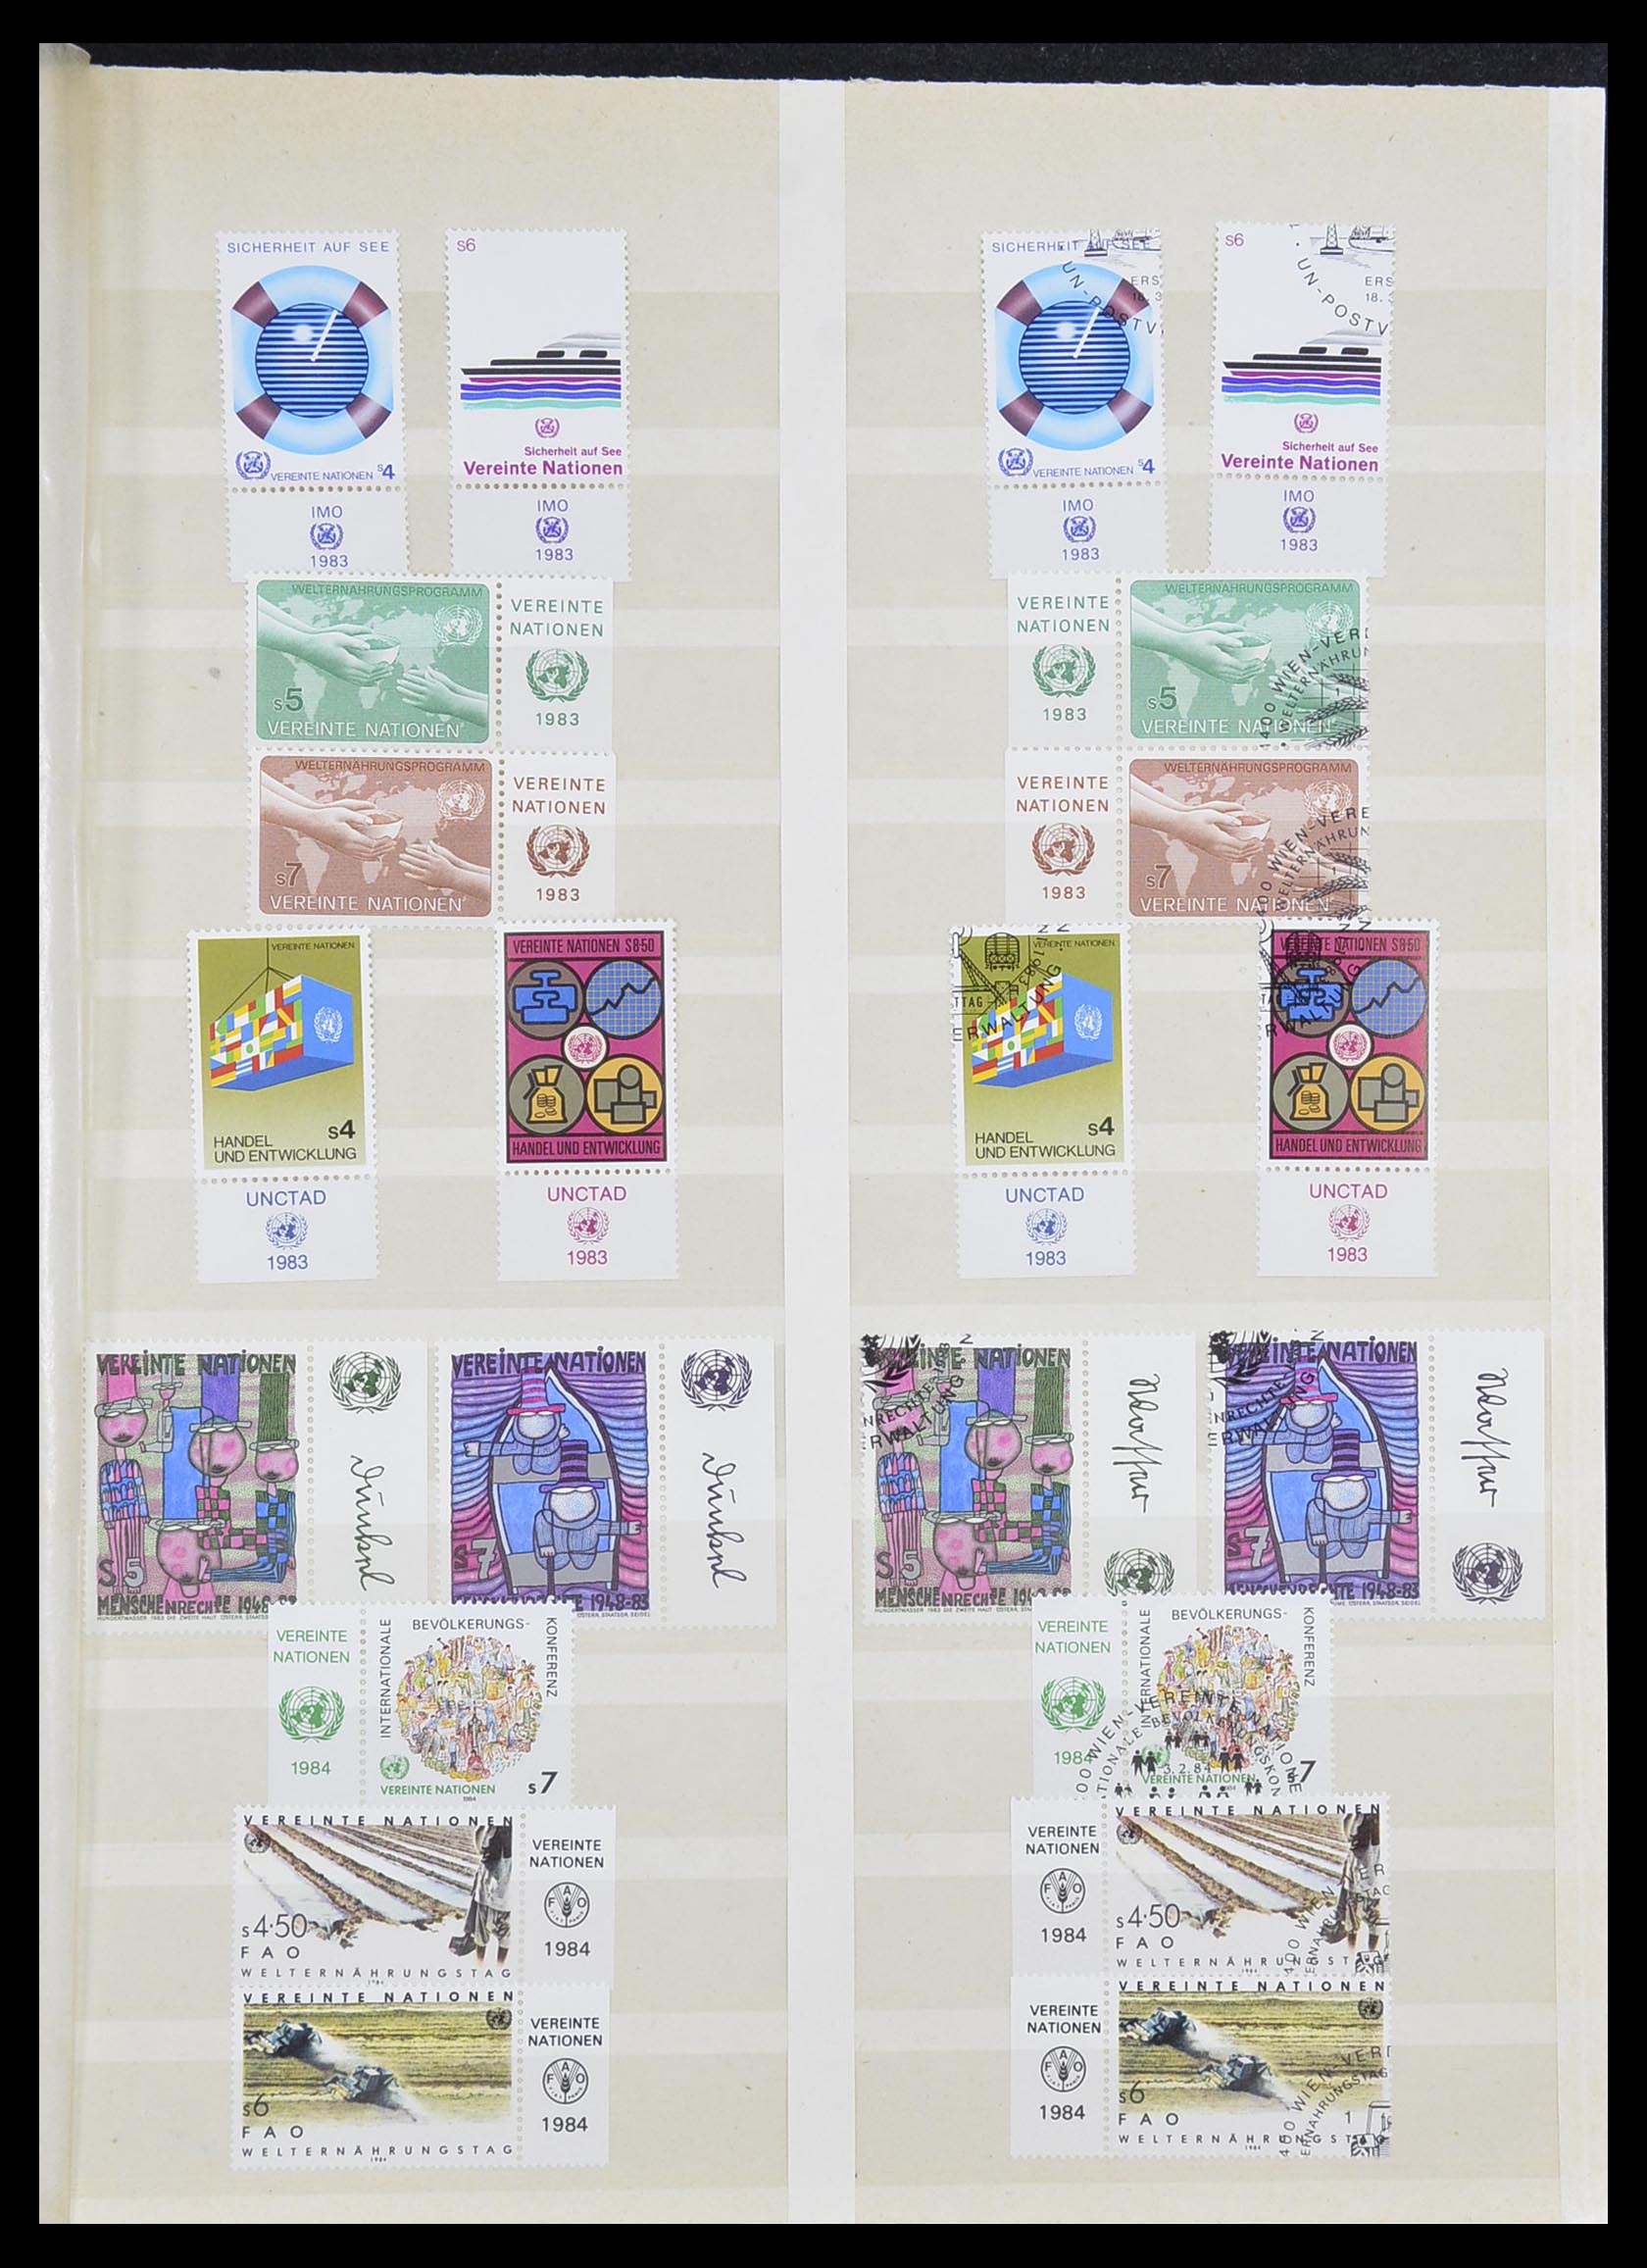 33538 003 - Stamp collection 33538 United Nations until 2017!